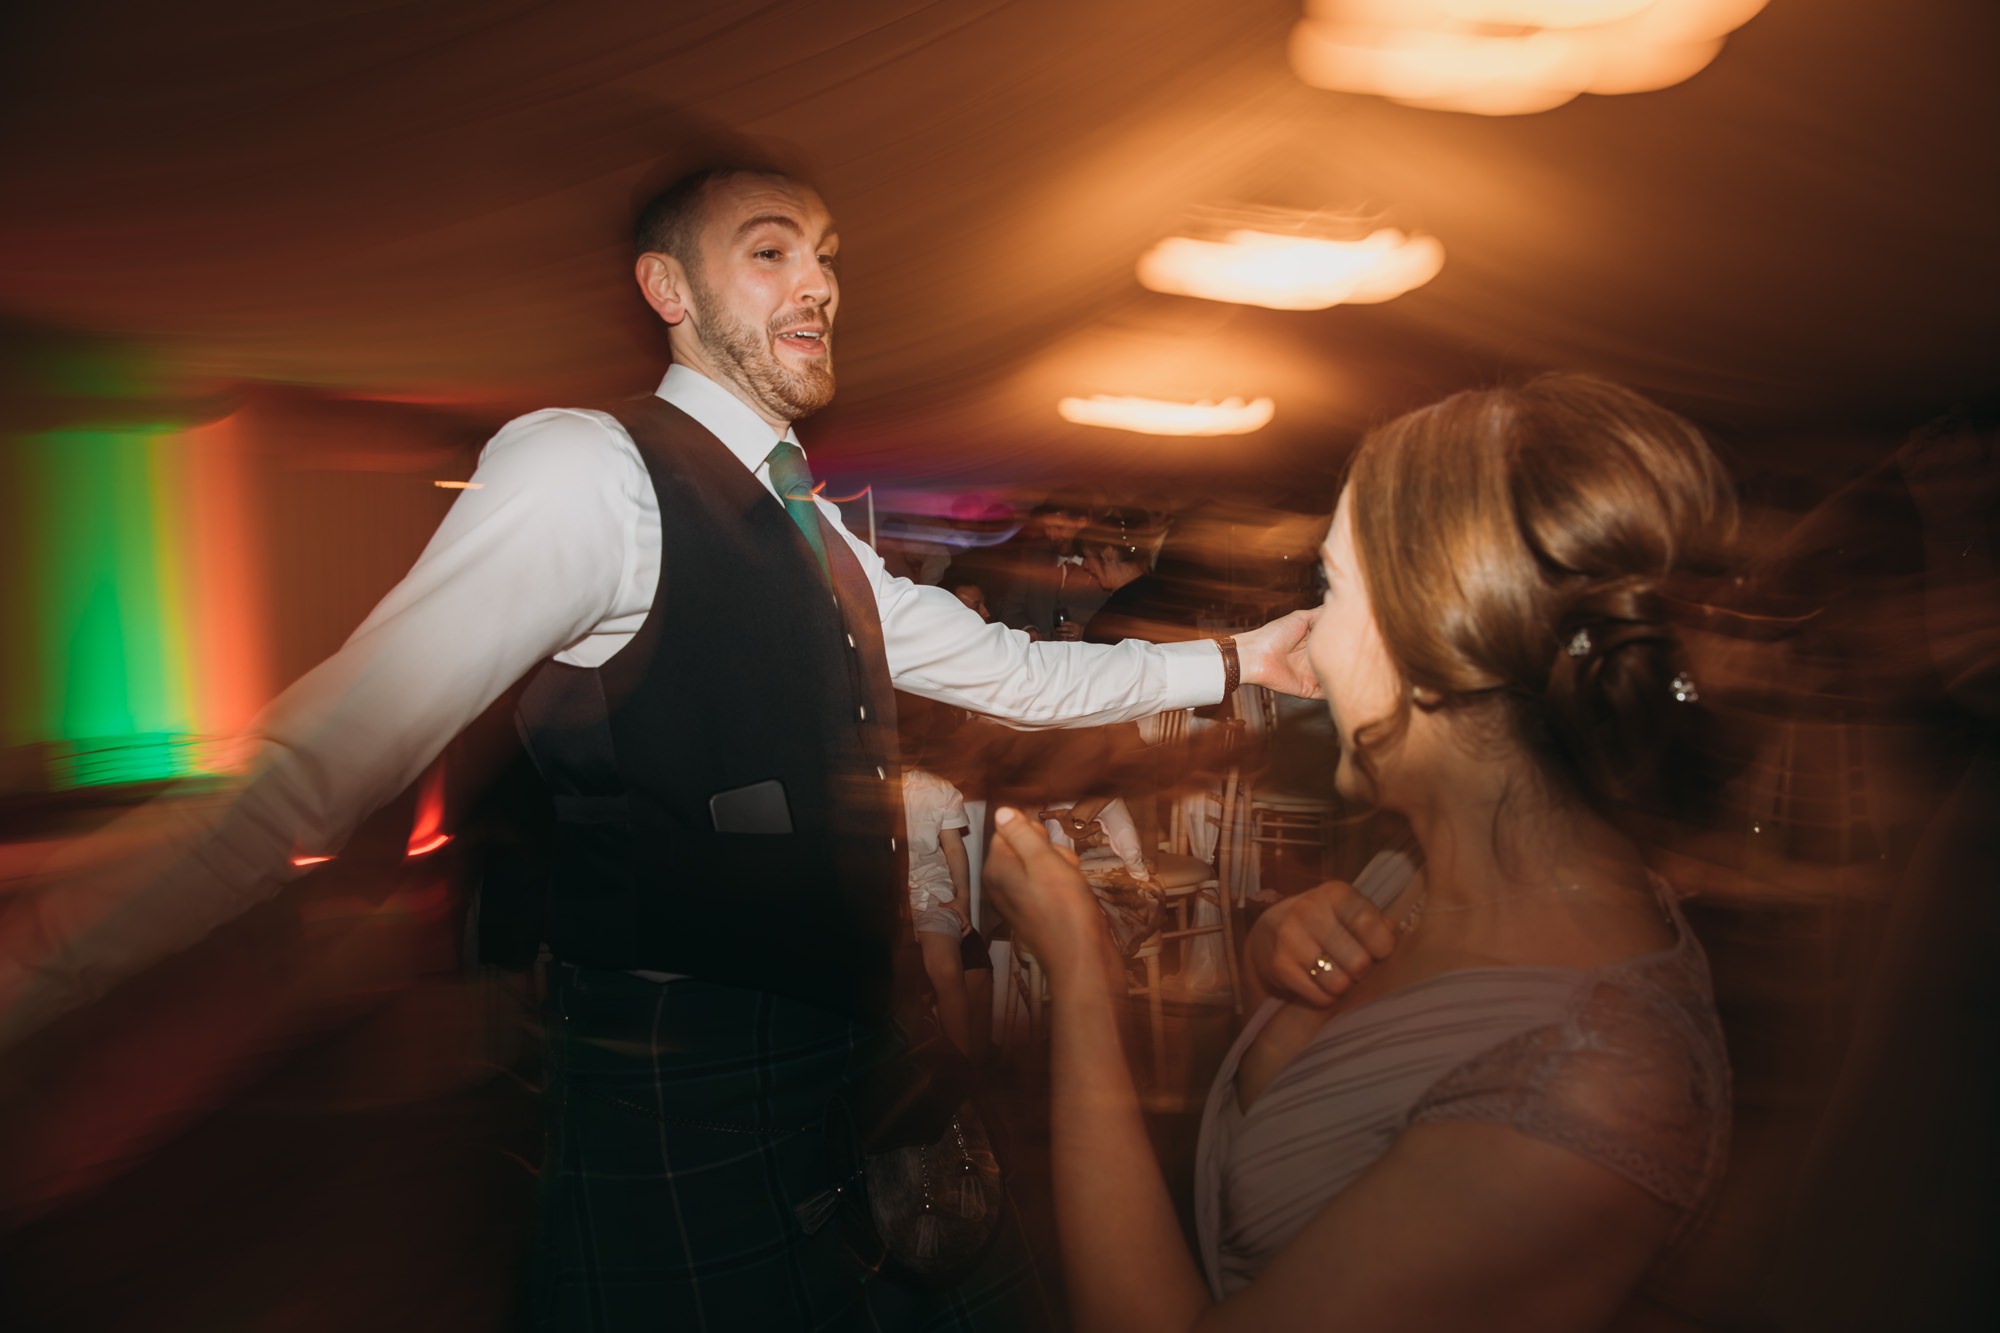 epic dance moves at a High Wards wedding